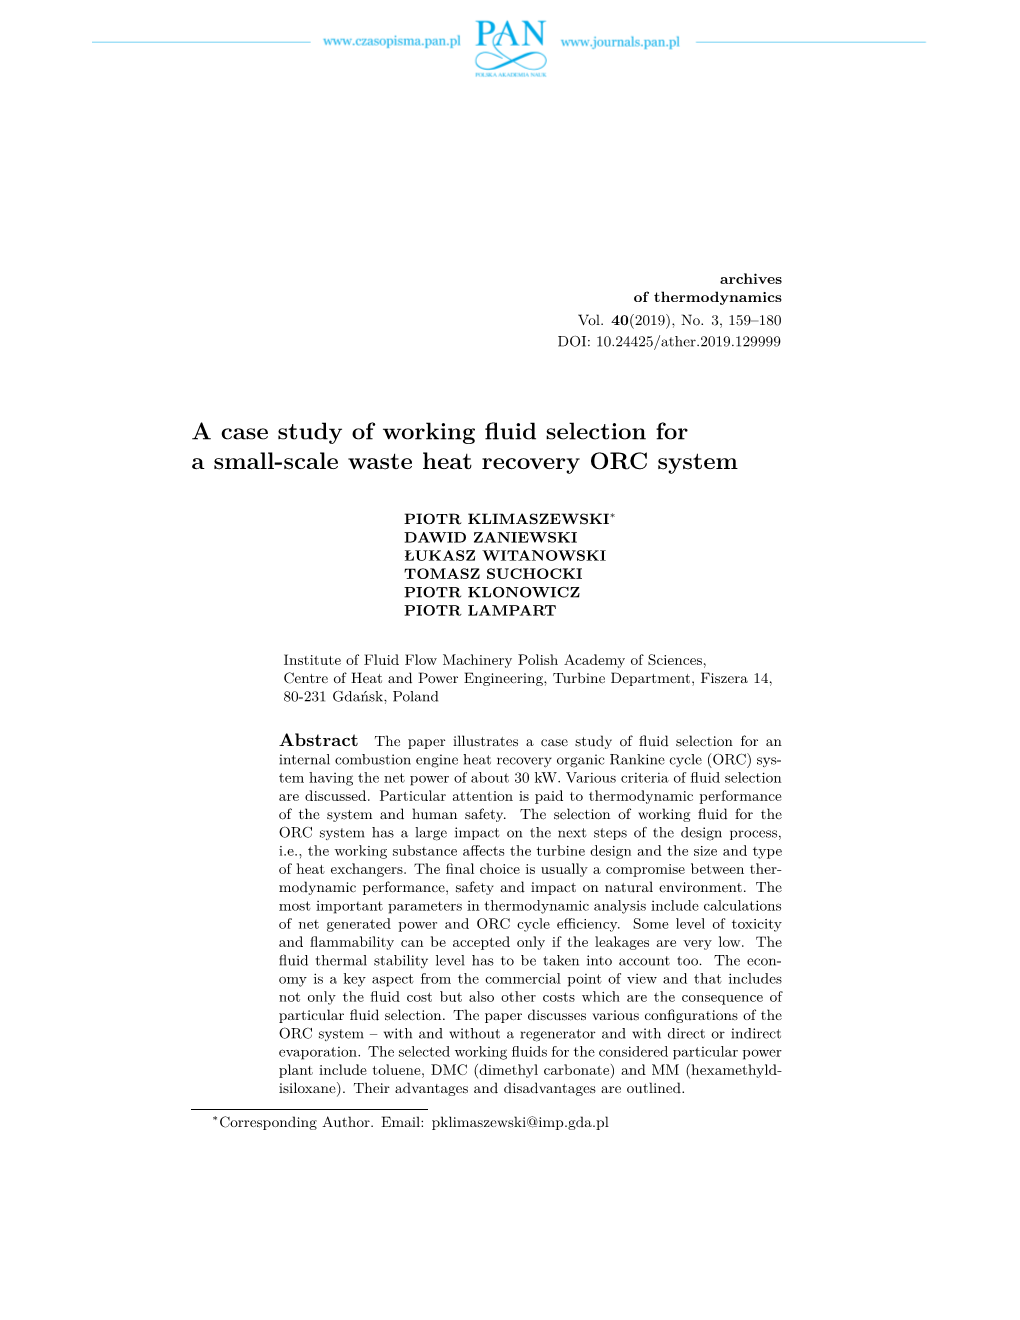 A Case Study of Working Fluid Selection for a Small-Scale Waste Heat